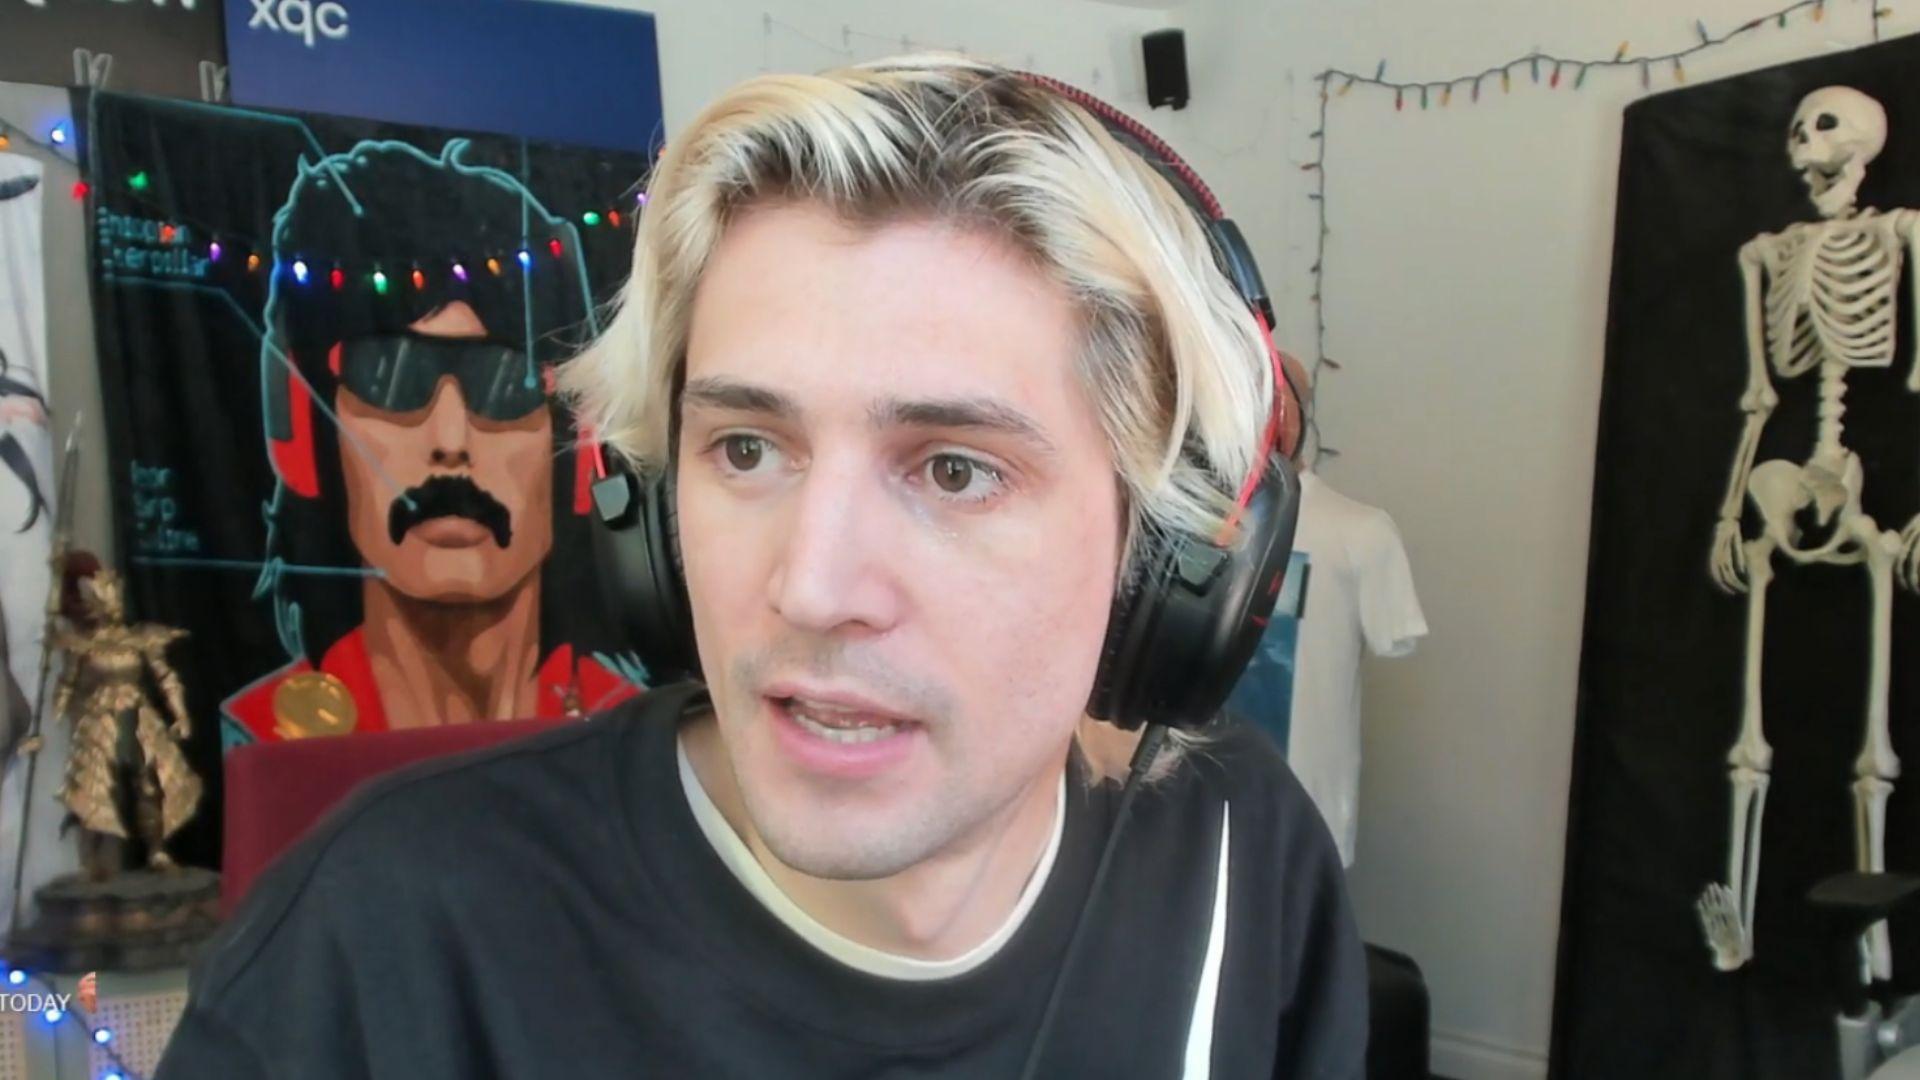 xQc in black t shirt with white and red writing on talking to camera